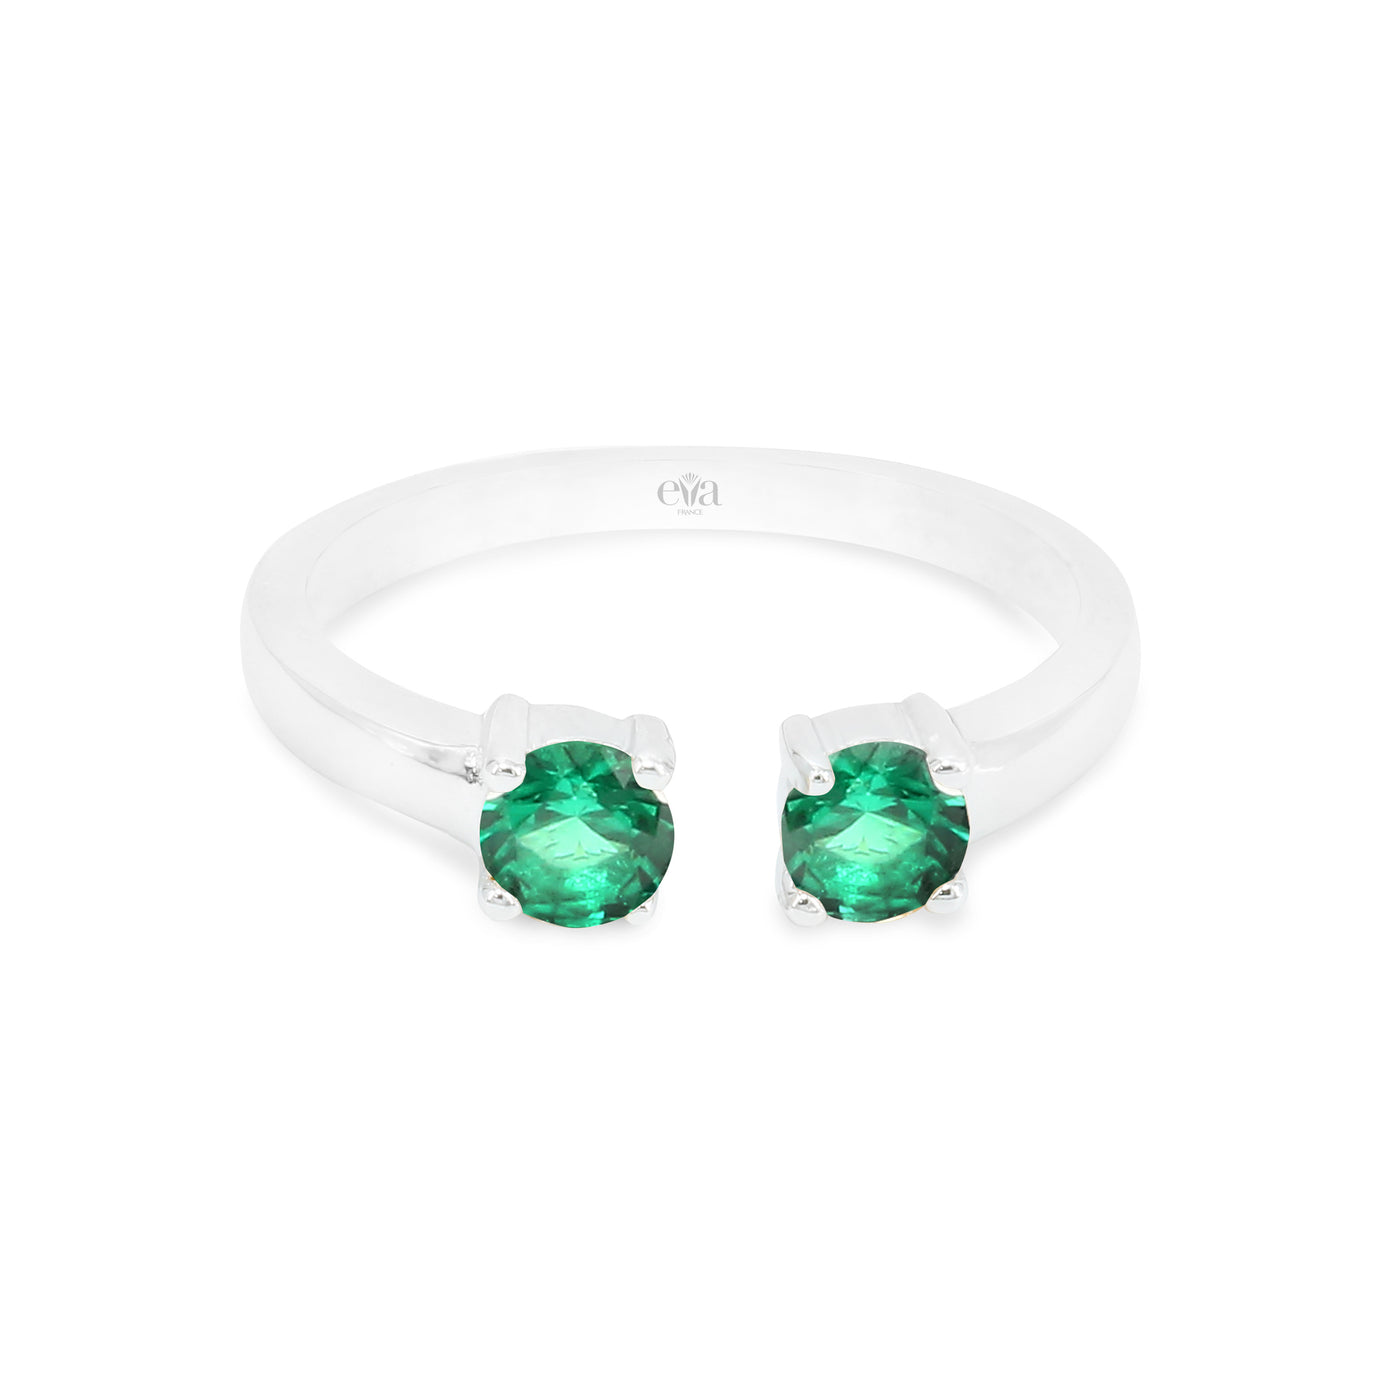 MAY BIRTHSTONE BRILLIANT CUT DOUBLE STONE OPEN  - خاتمRING